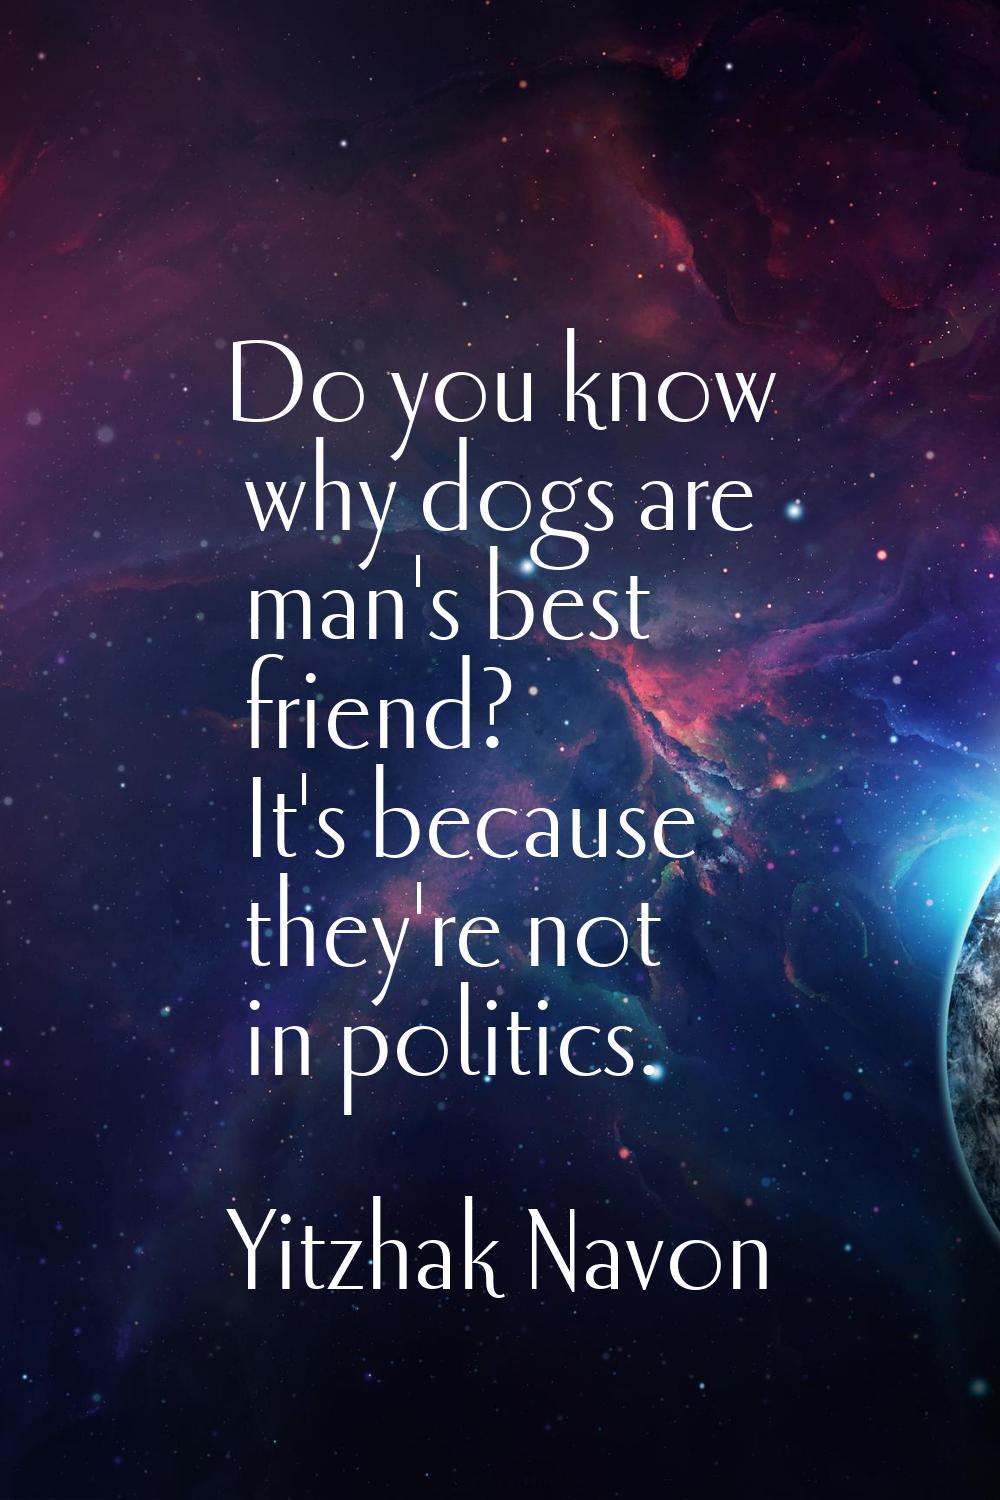 Do you know why dogs are man's best friend? It's because they're not in politics.